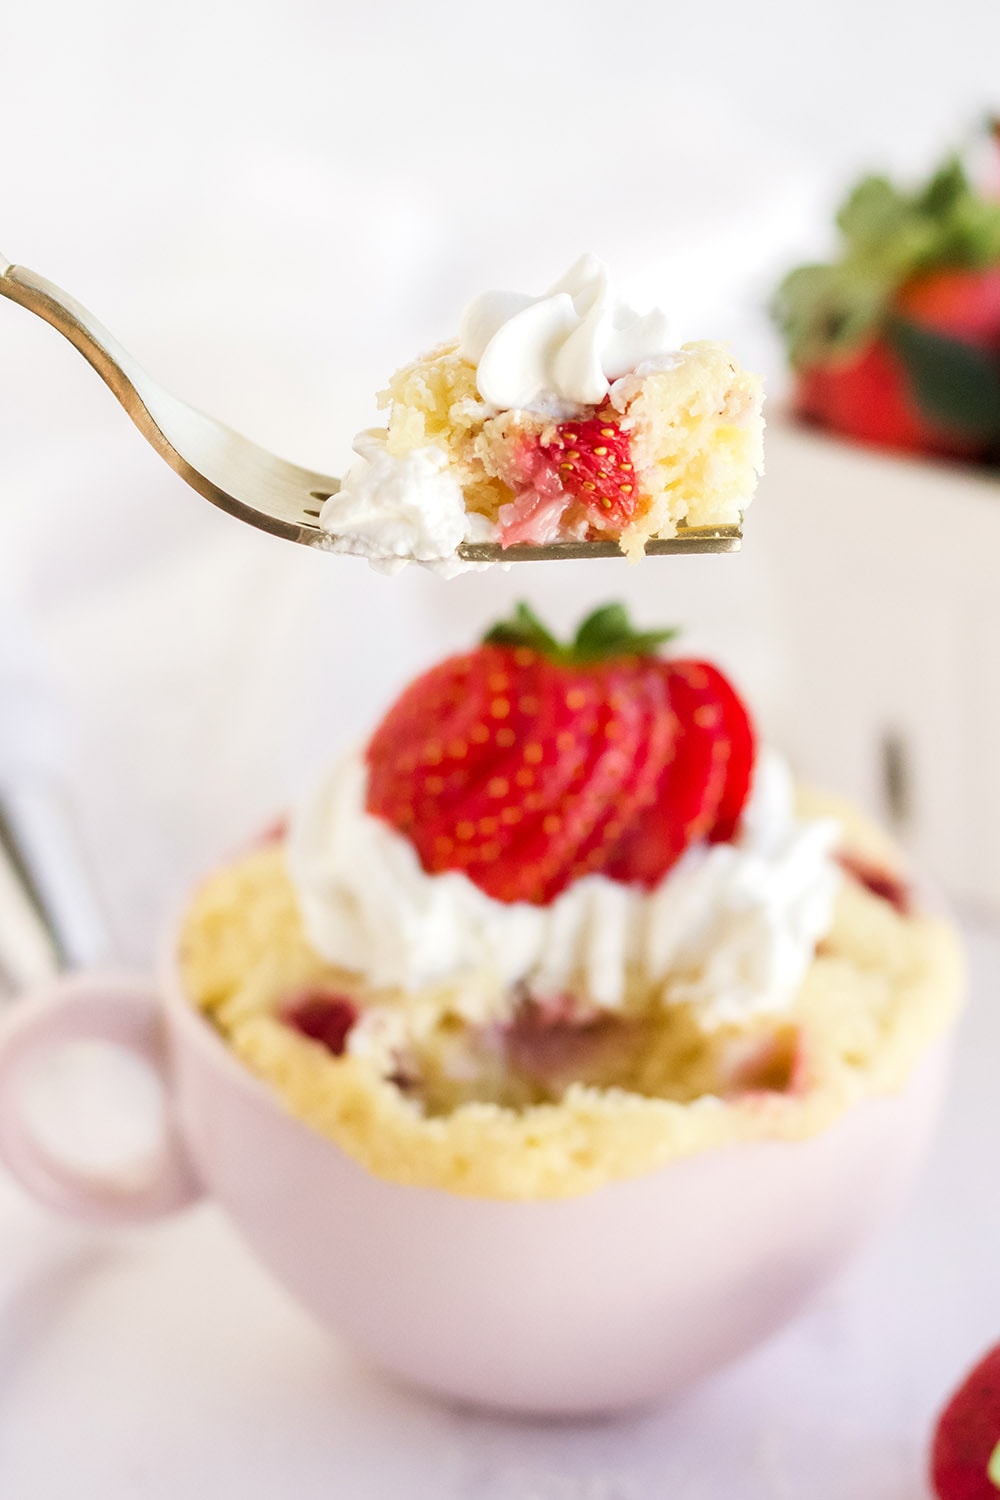 Fork with cake on it raised above strawberry cake in a mug.